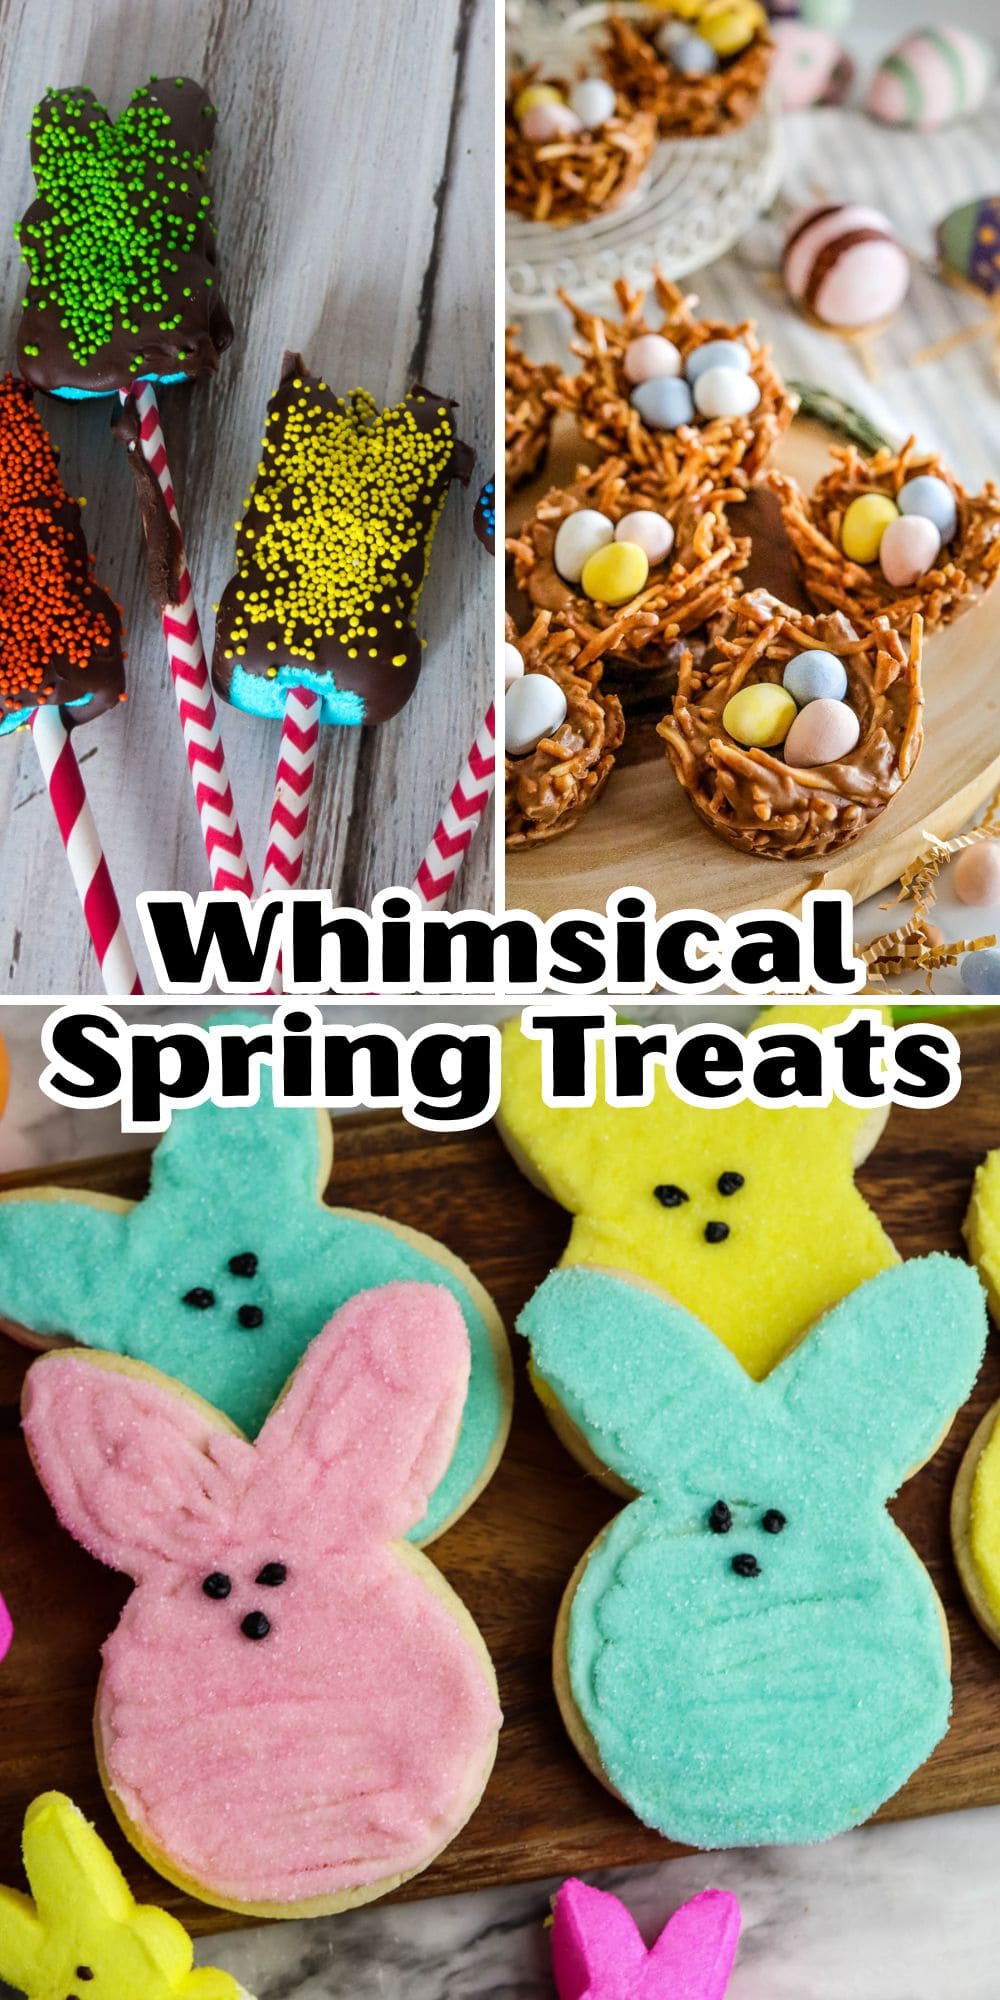 Colorful and playful spring-themed confectioneries, perfect for festive occasions.